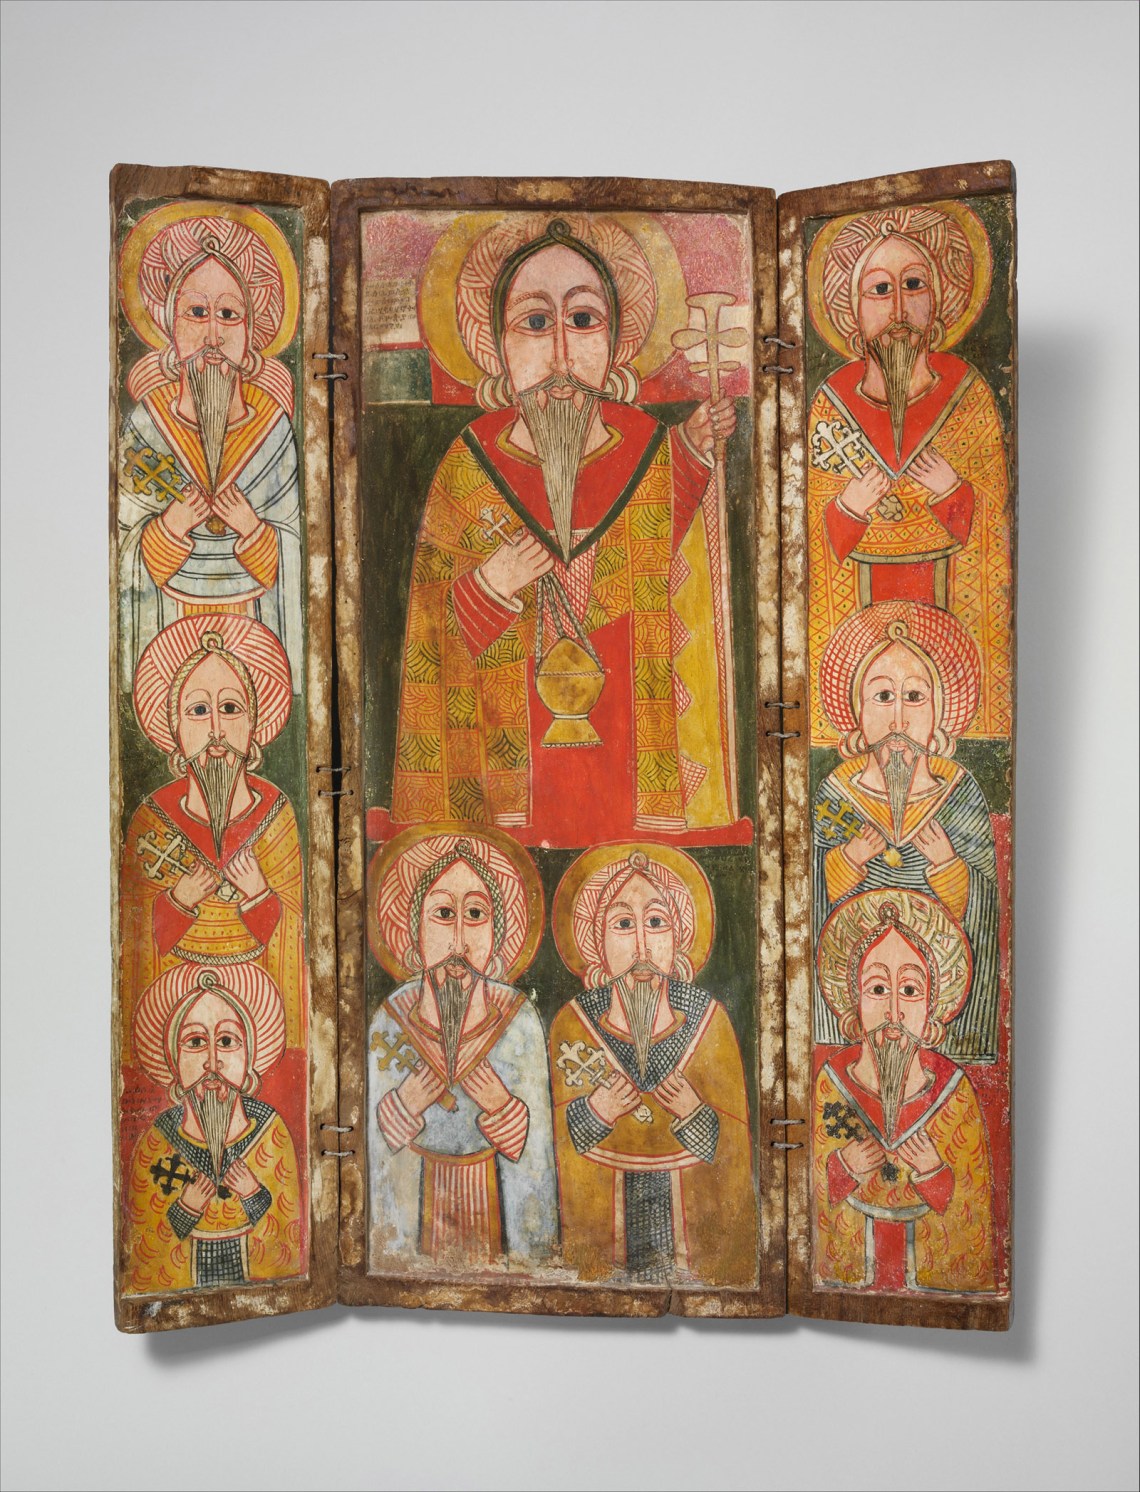 A triptych depicting Saint Eustathios and his disciples